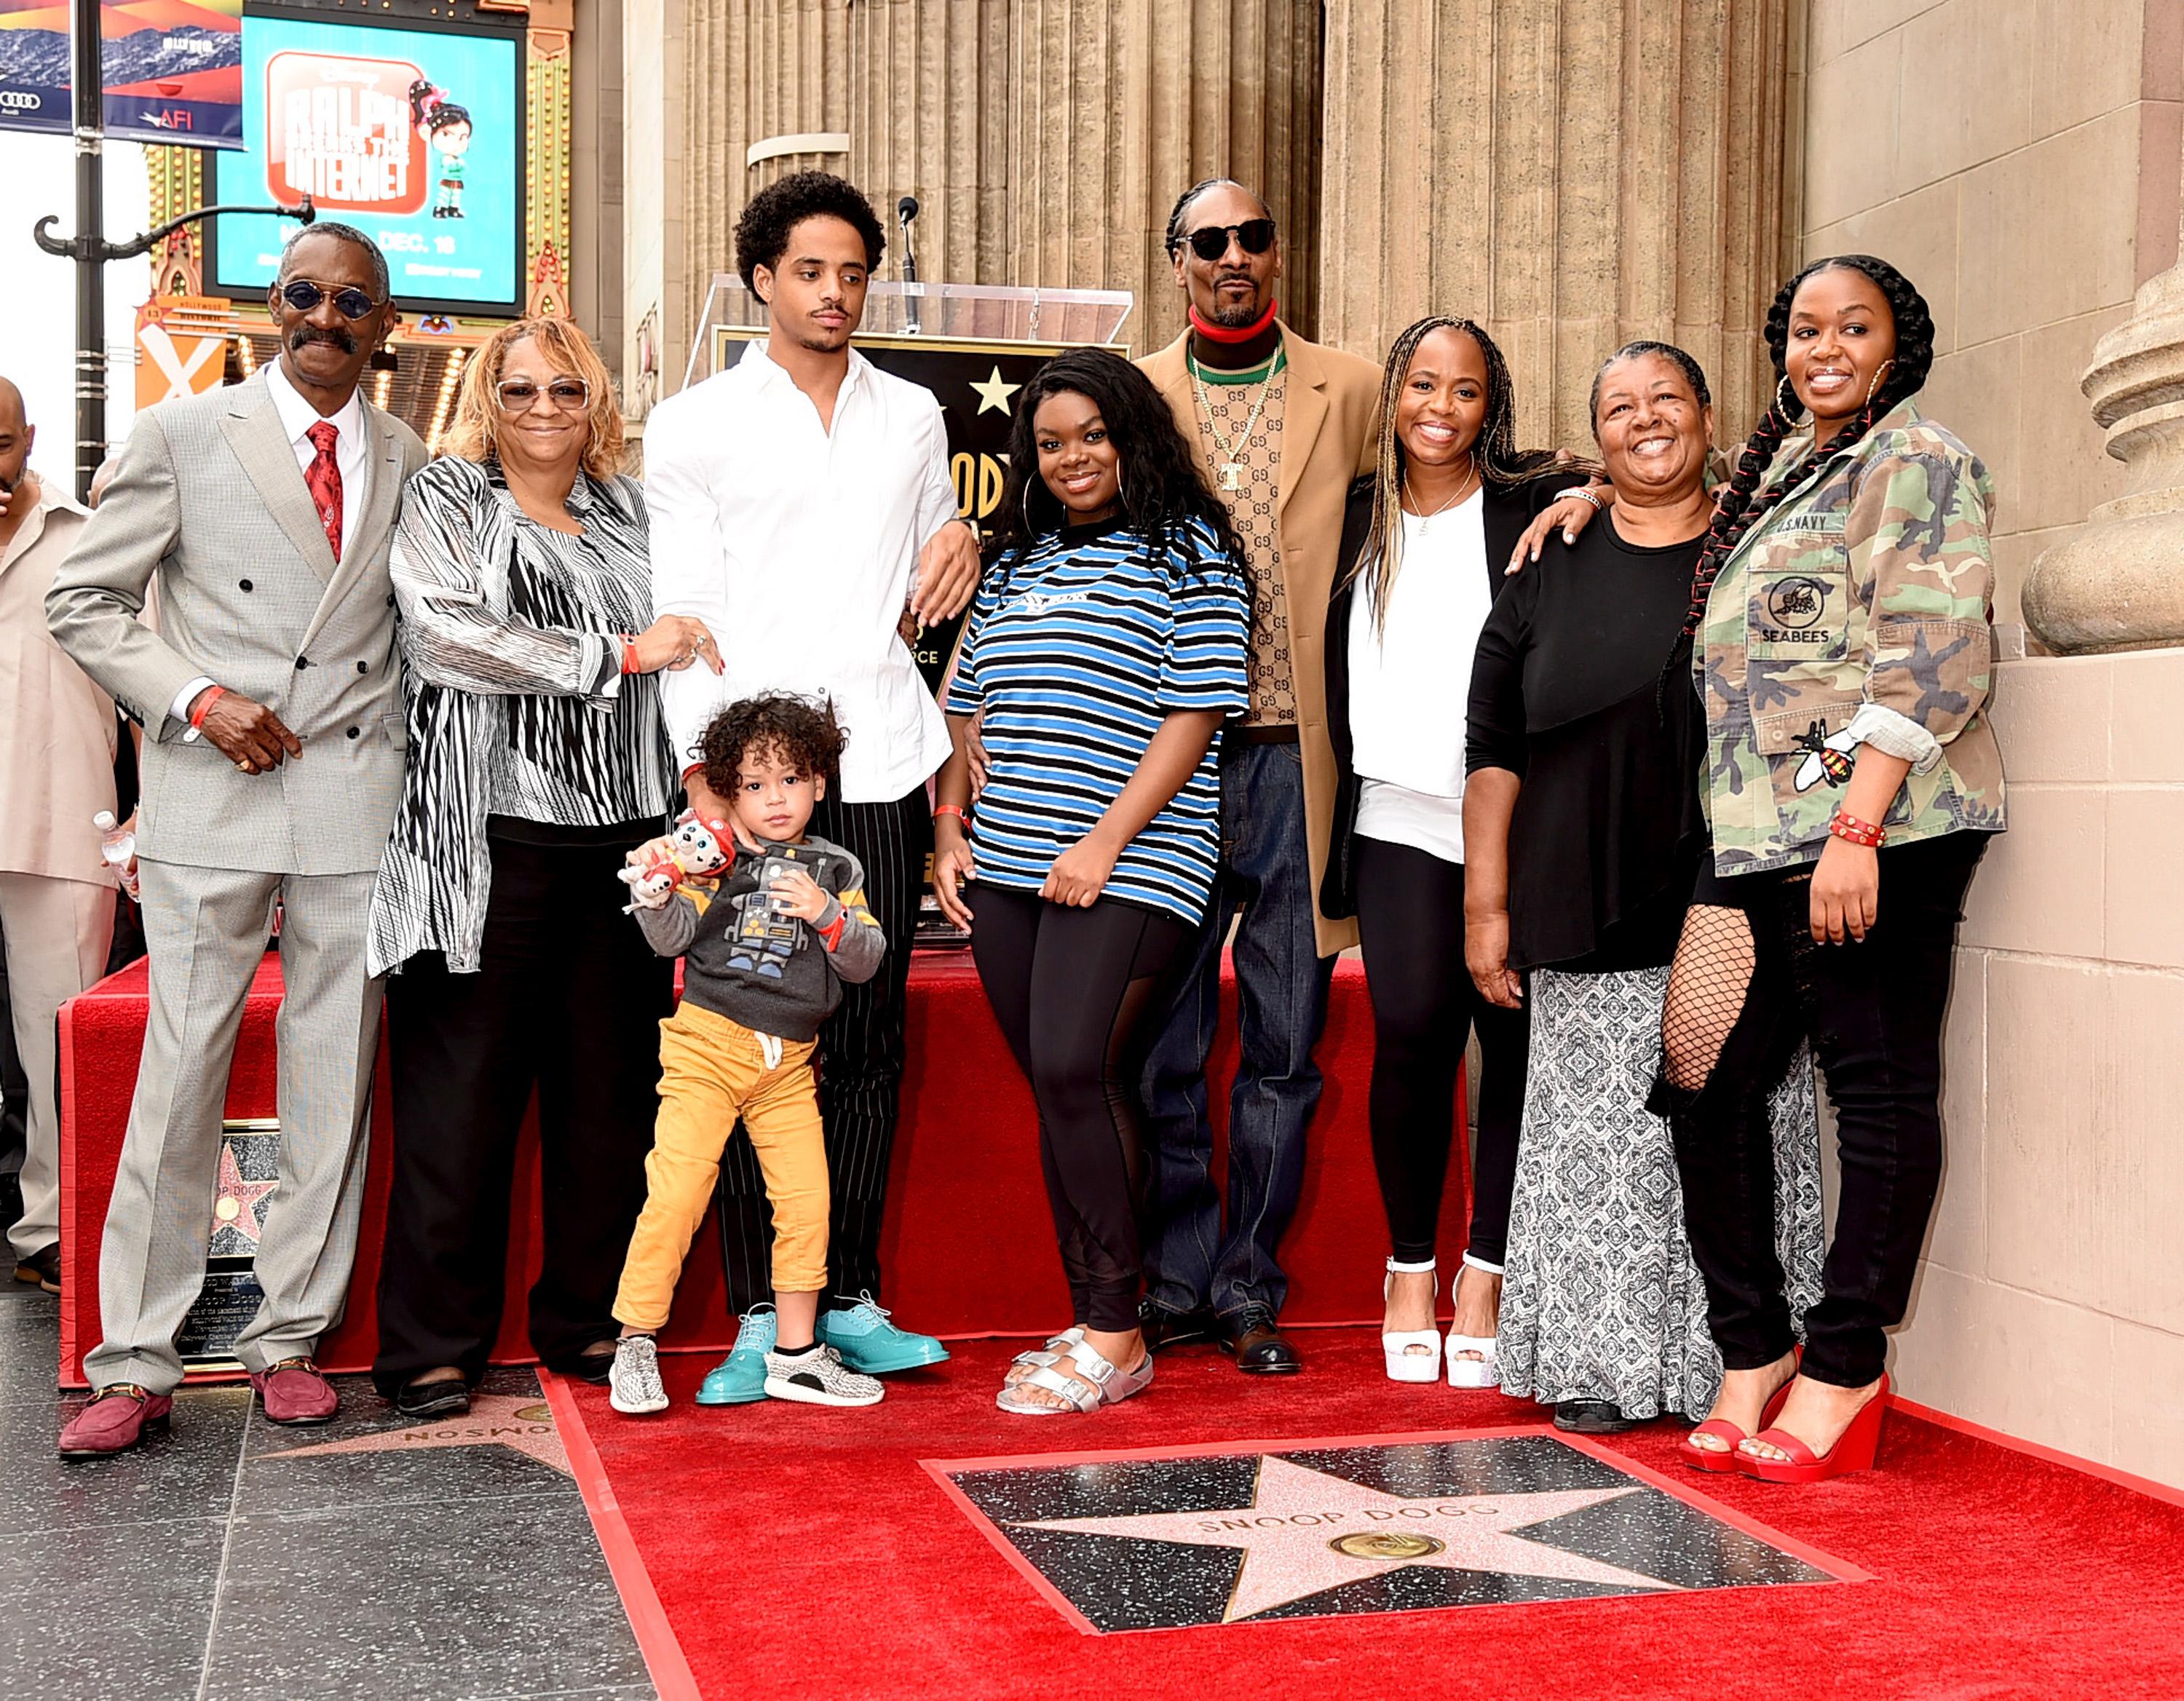 Beverly Broadus-Green: Snoop Dogg’s Mom, and the Woman Behind His Apology